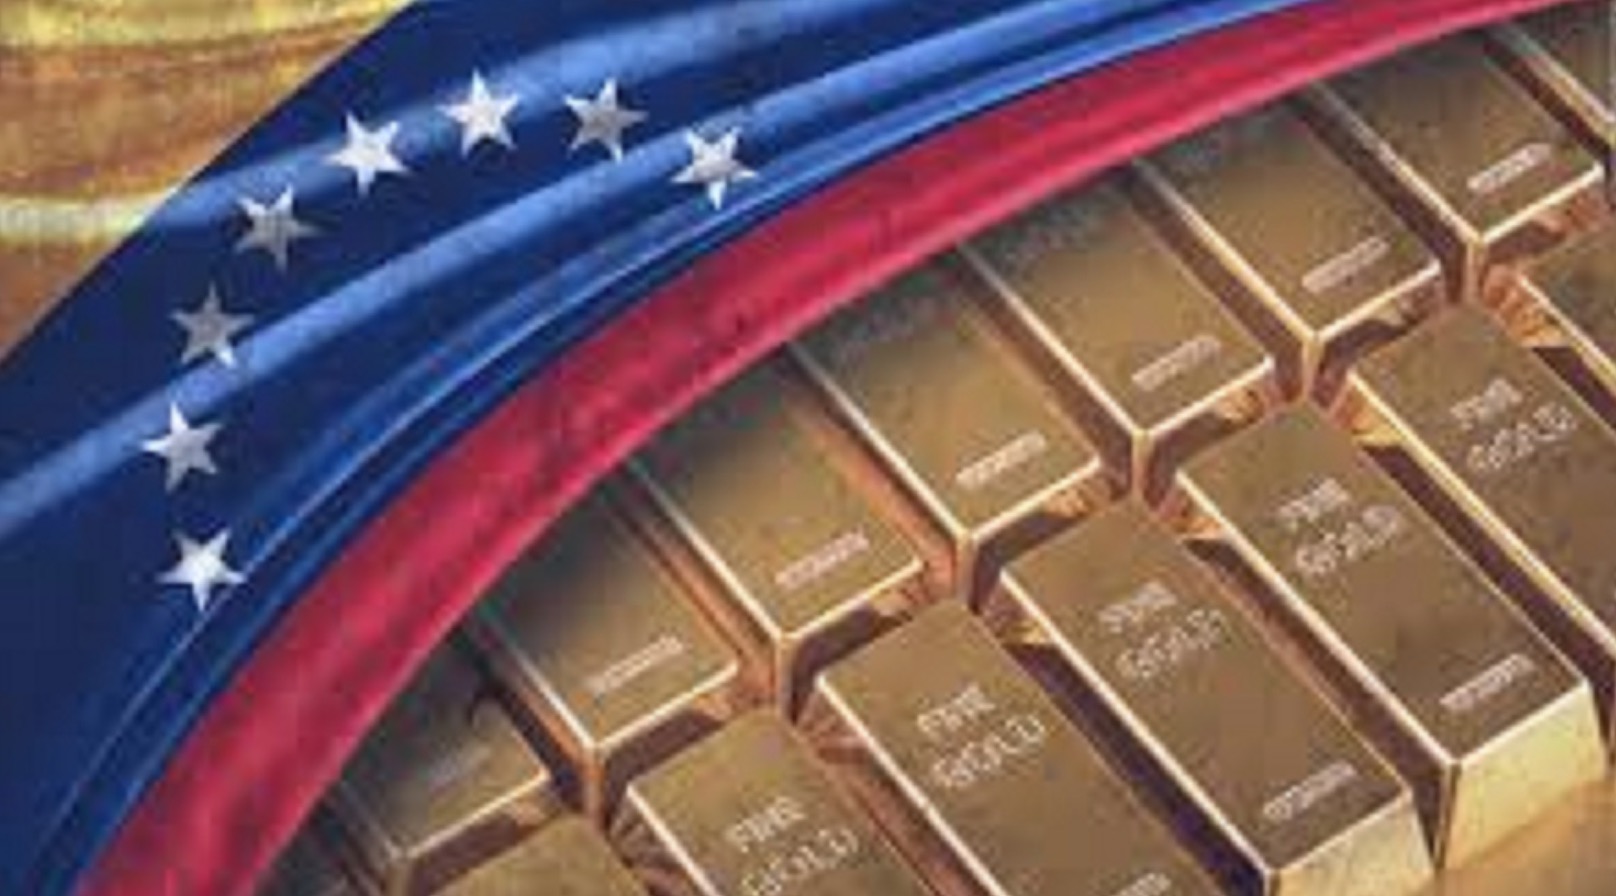 Venezuela is under heavy sanctions. The country is in bankruptcy.